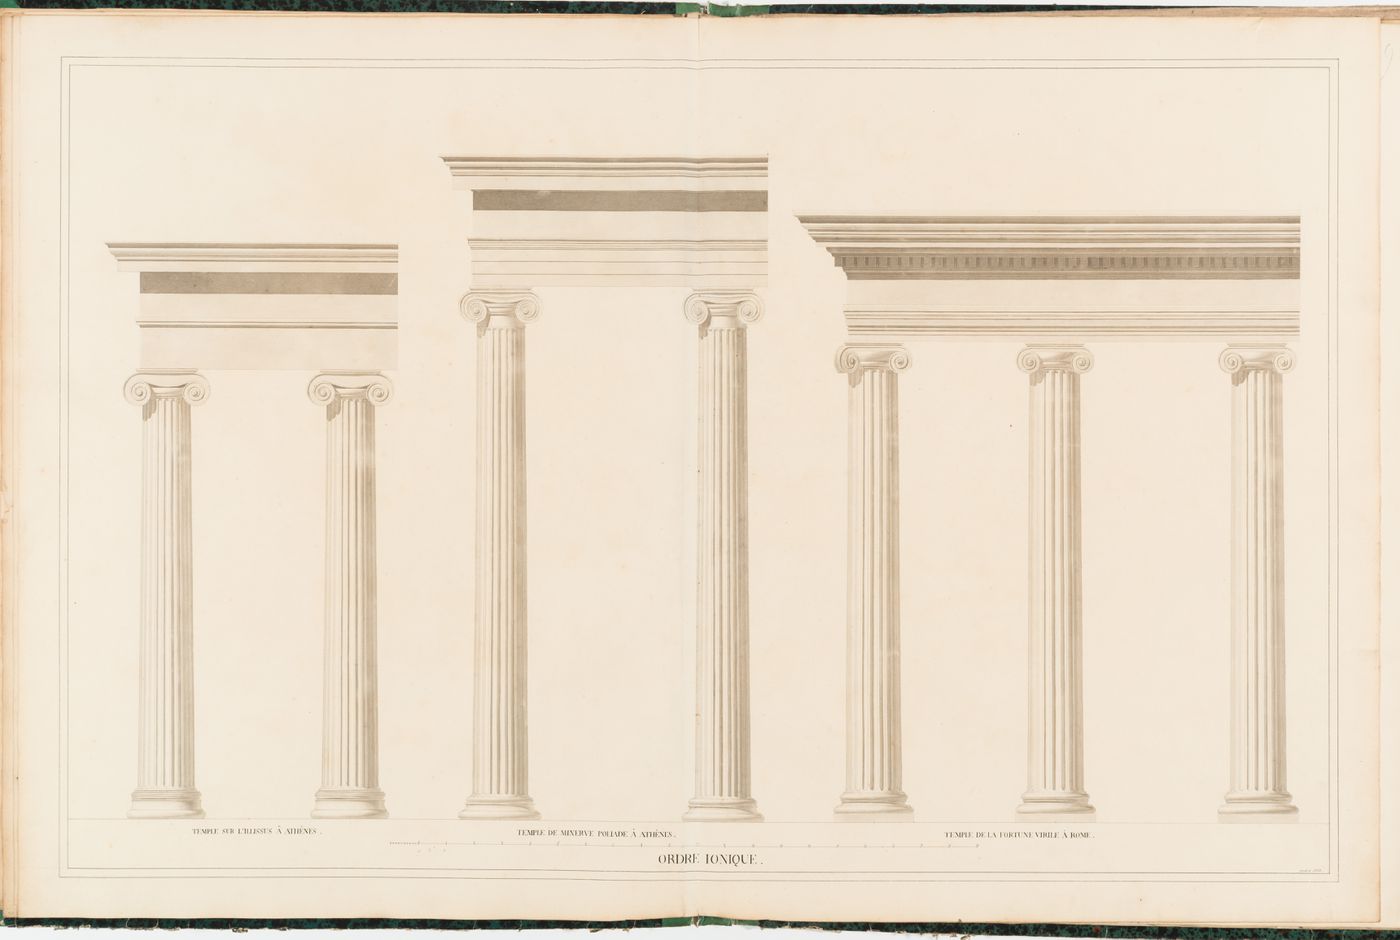 Partial elevations of columns and entablatures from three Ionic temples: Temple on the Illissus and the Temple of Athena Nike, Athens, and the Temple of Fortuna Virilis, Rome